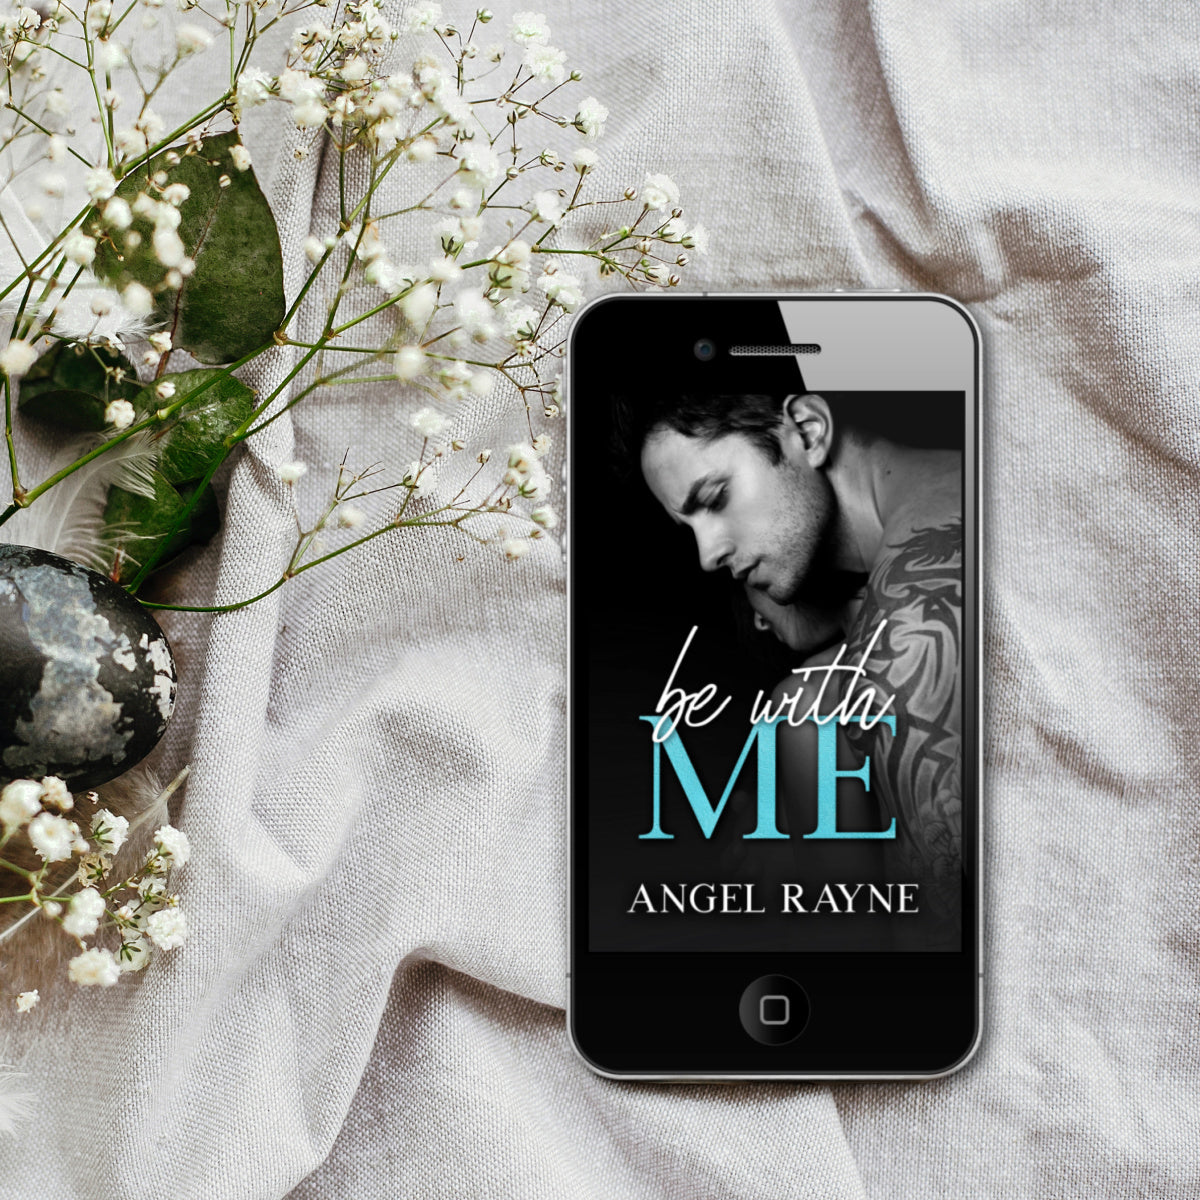 Be With Me ebook cover on iphone - lifestyle image